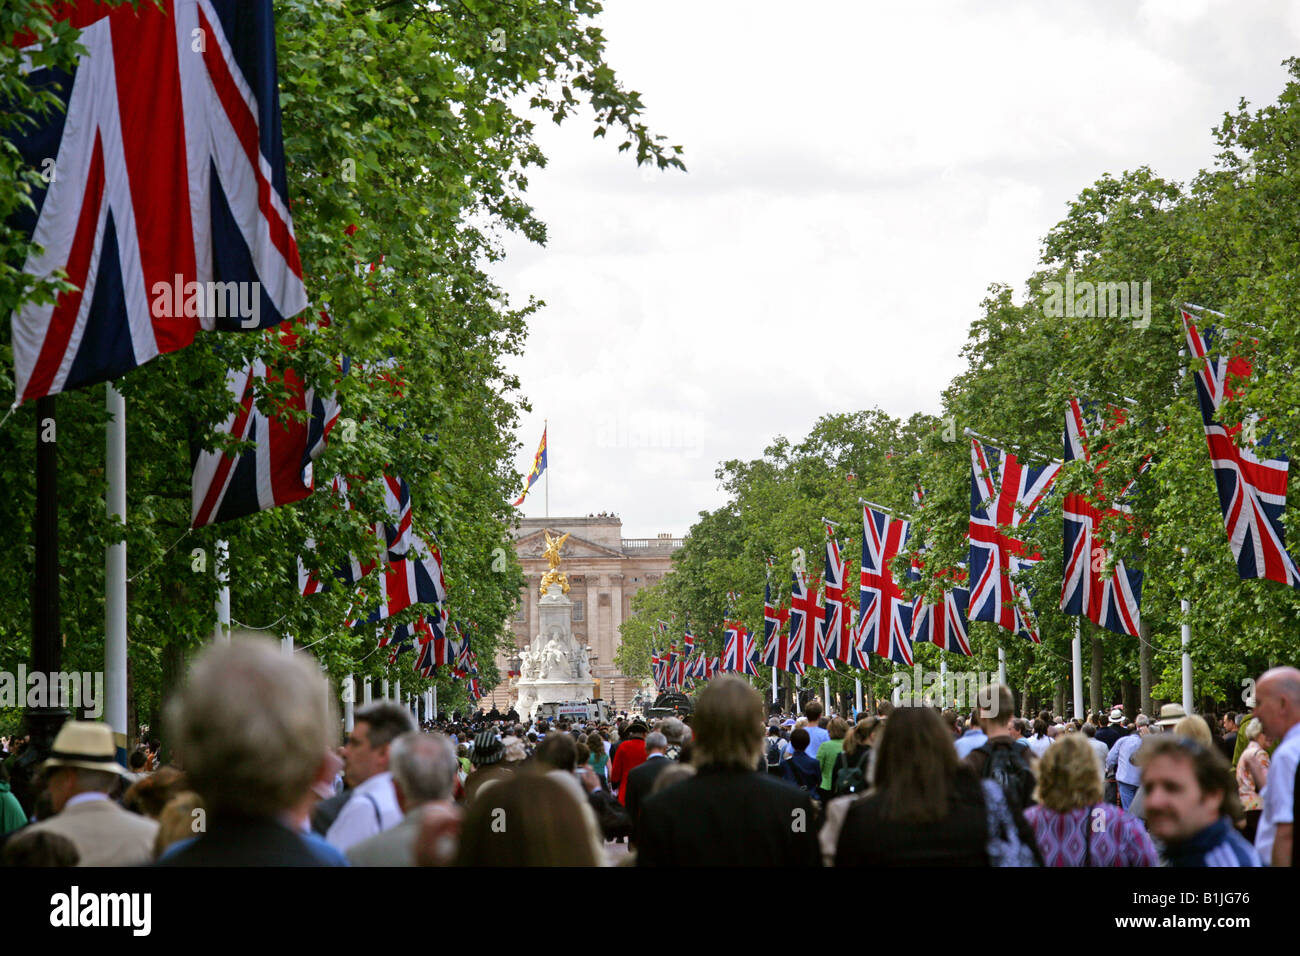 A Throng of People in the Mall Waiting for the Queen to Appear on the Balcony of Buckingham Palace After Trooping the Colour Stock Photo